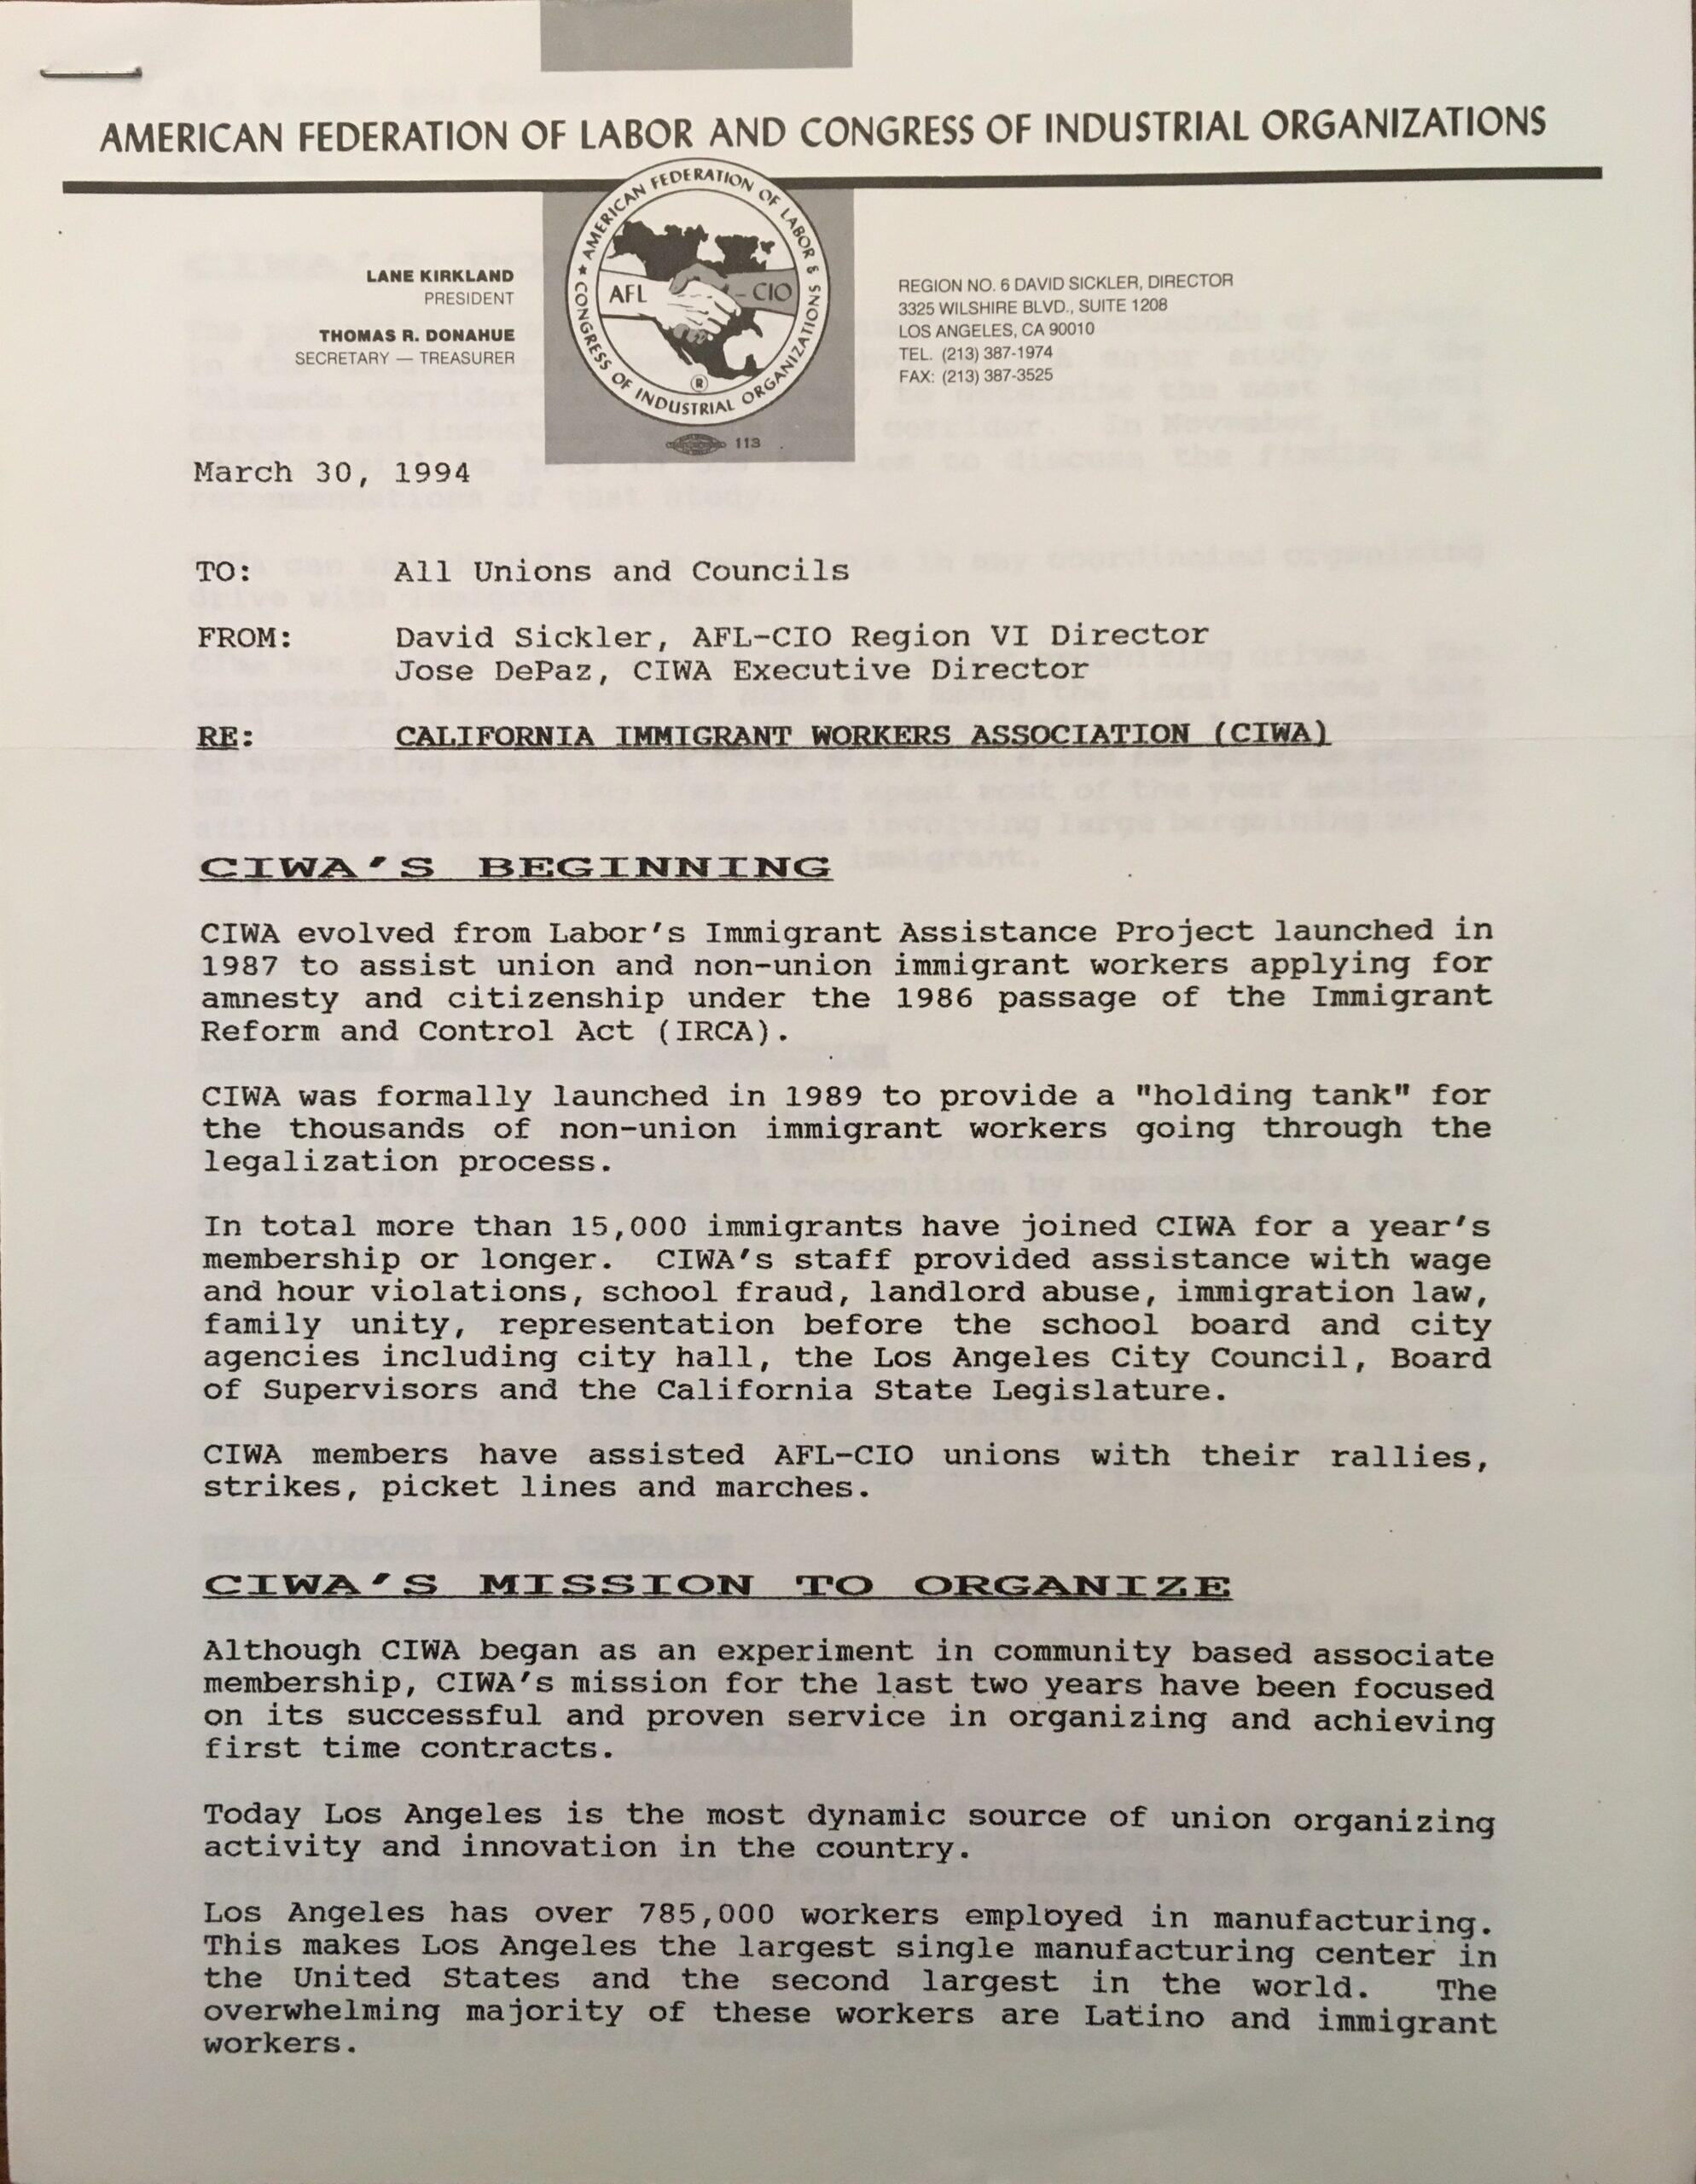 A memorandum appealing for support of the California Immigrant Workers Association